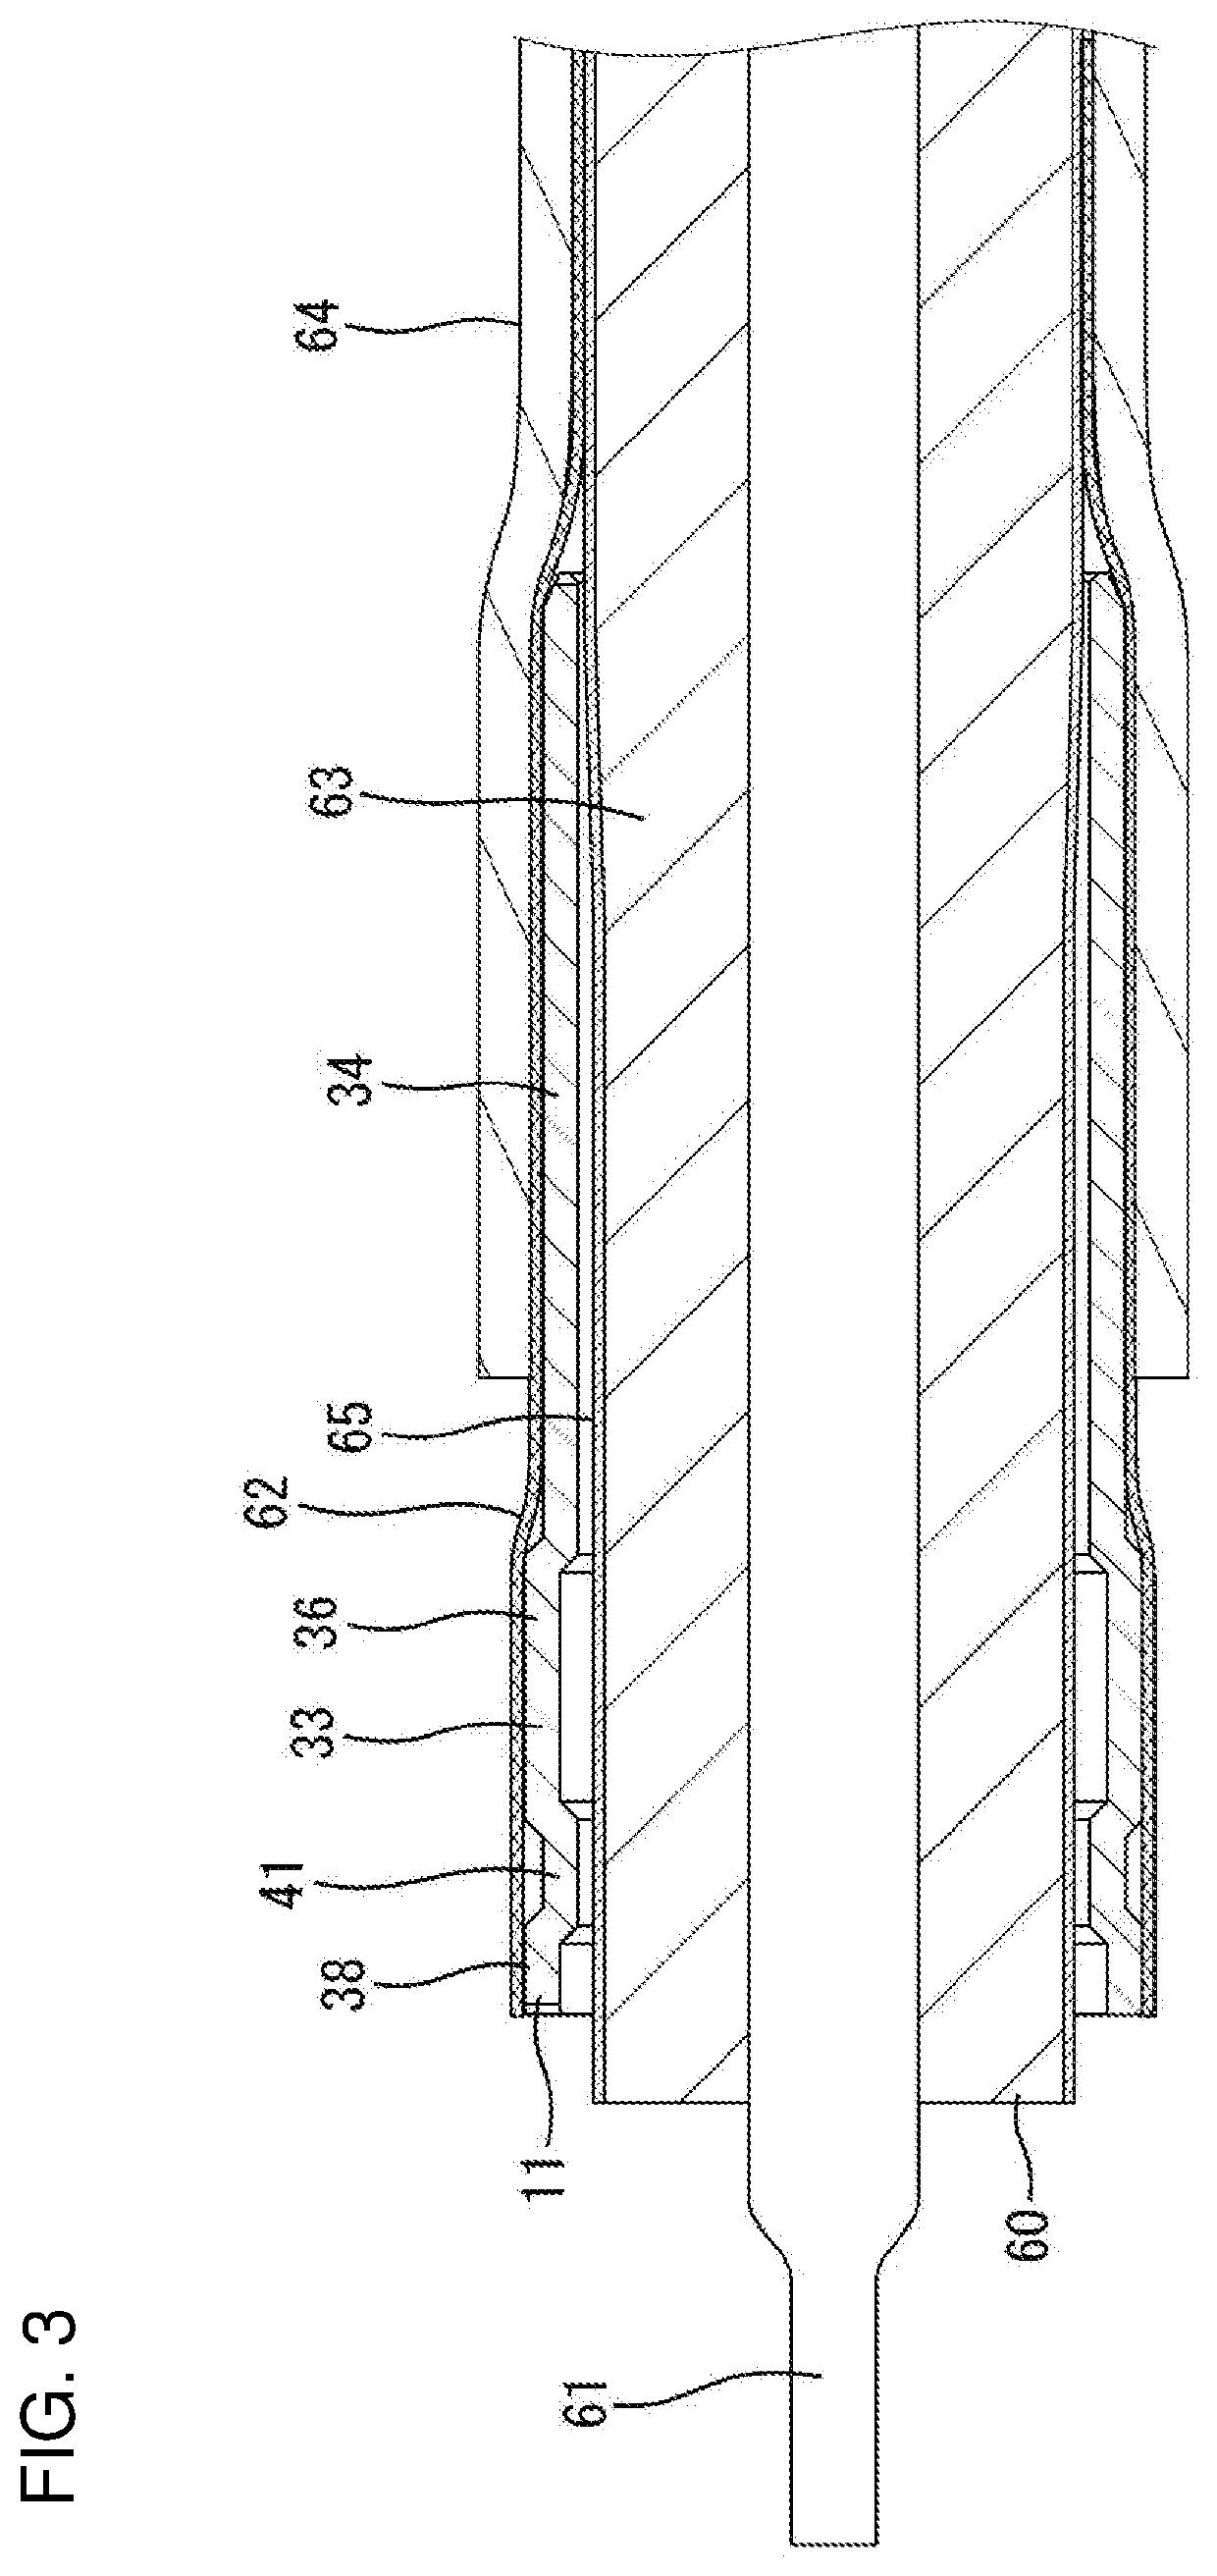 Sleeve and shield terminal manufacturing method